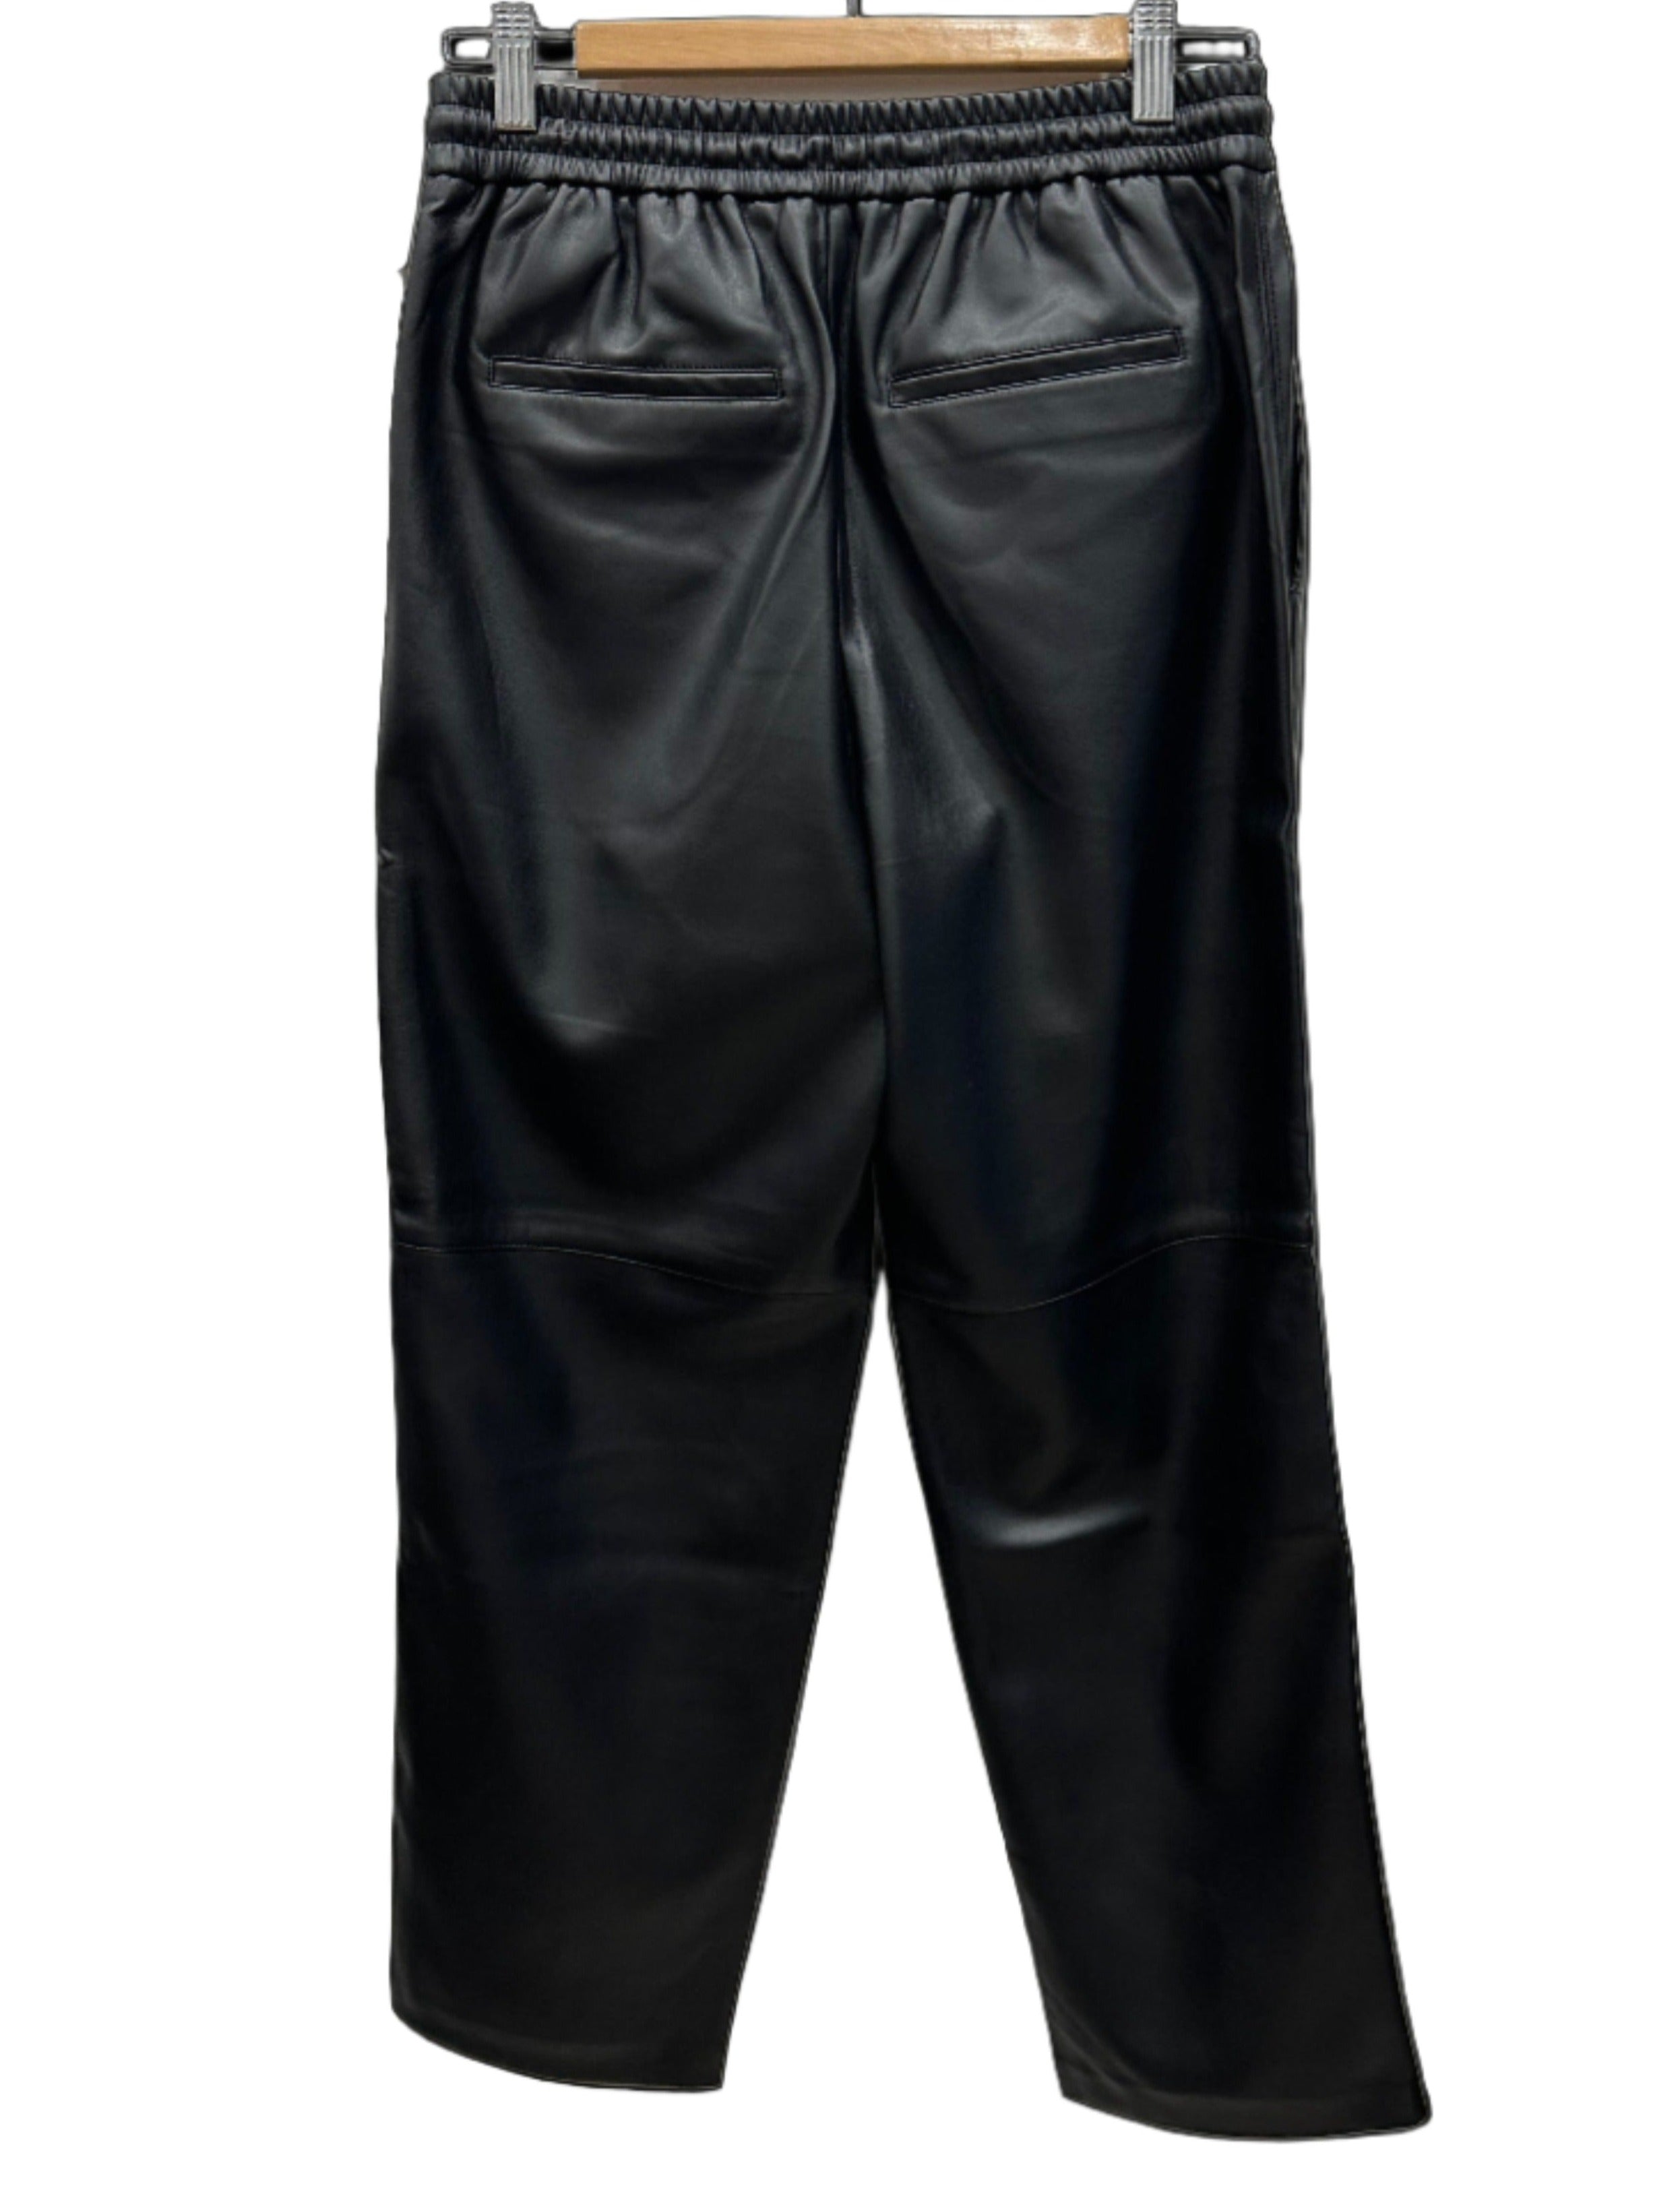 MNG Black Leather Pants S